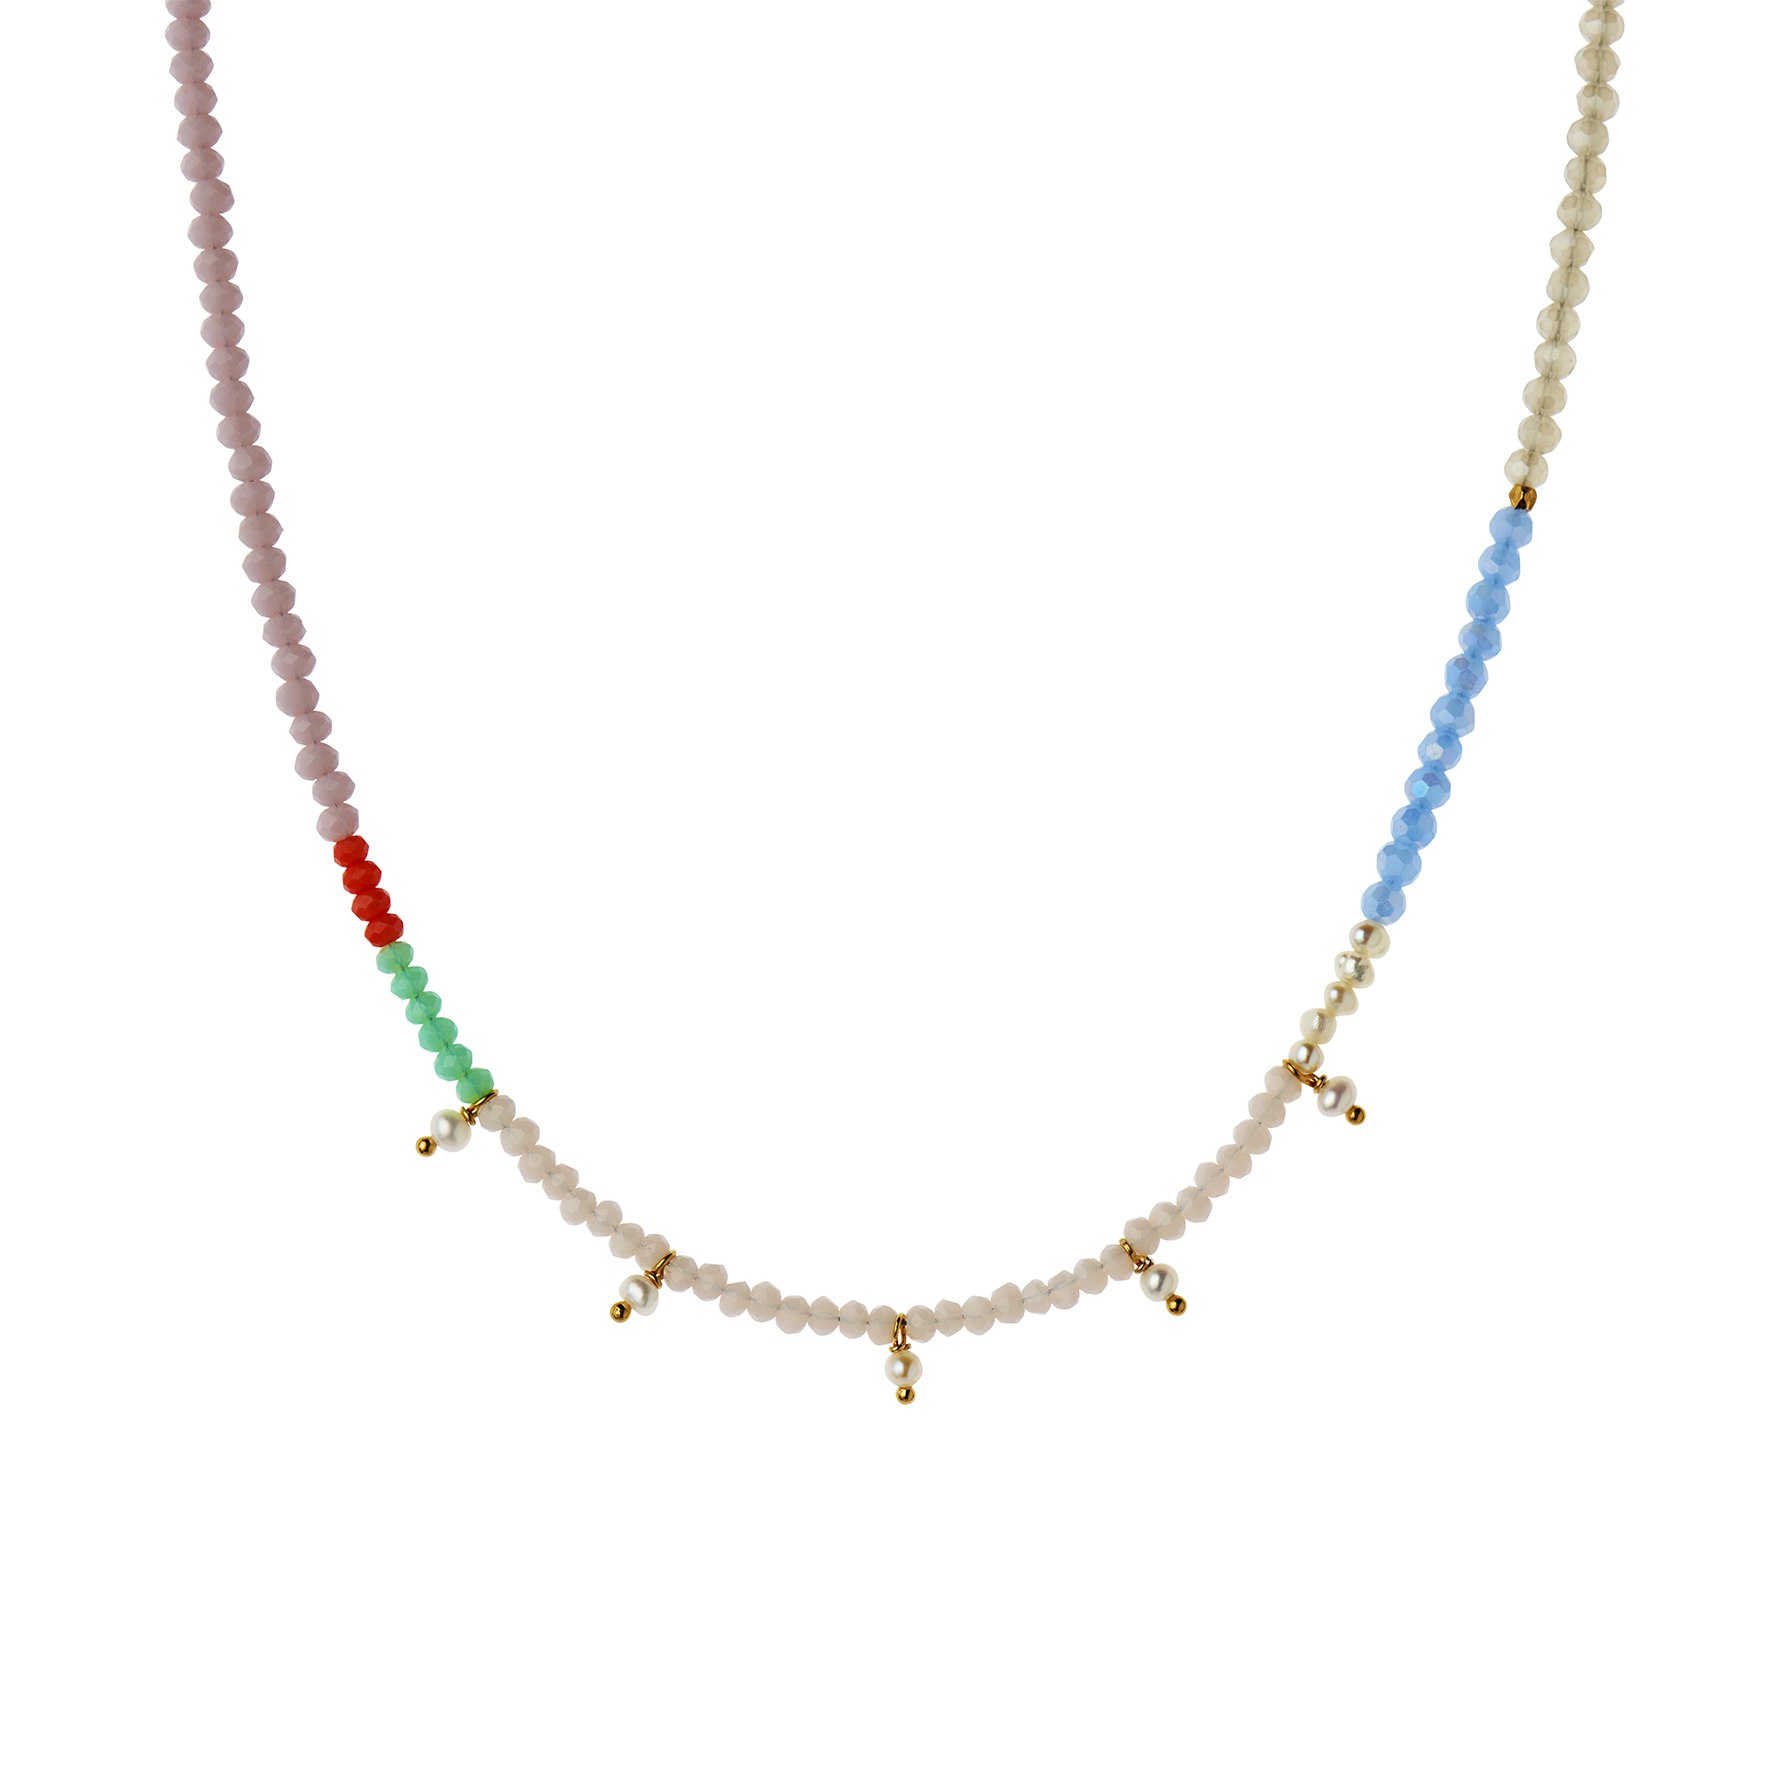 Heavenly Pearl Dream Necklace With Five Pendants Coral & Cool Mint